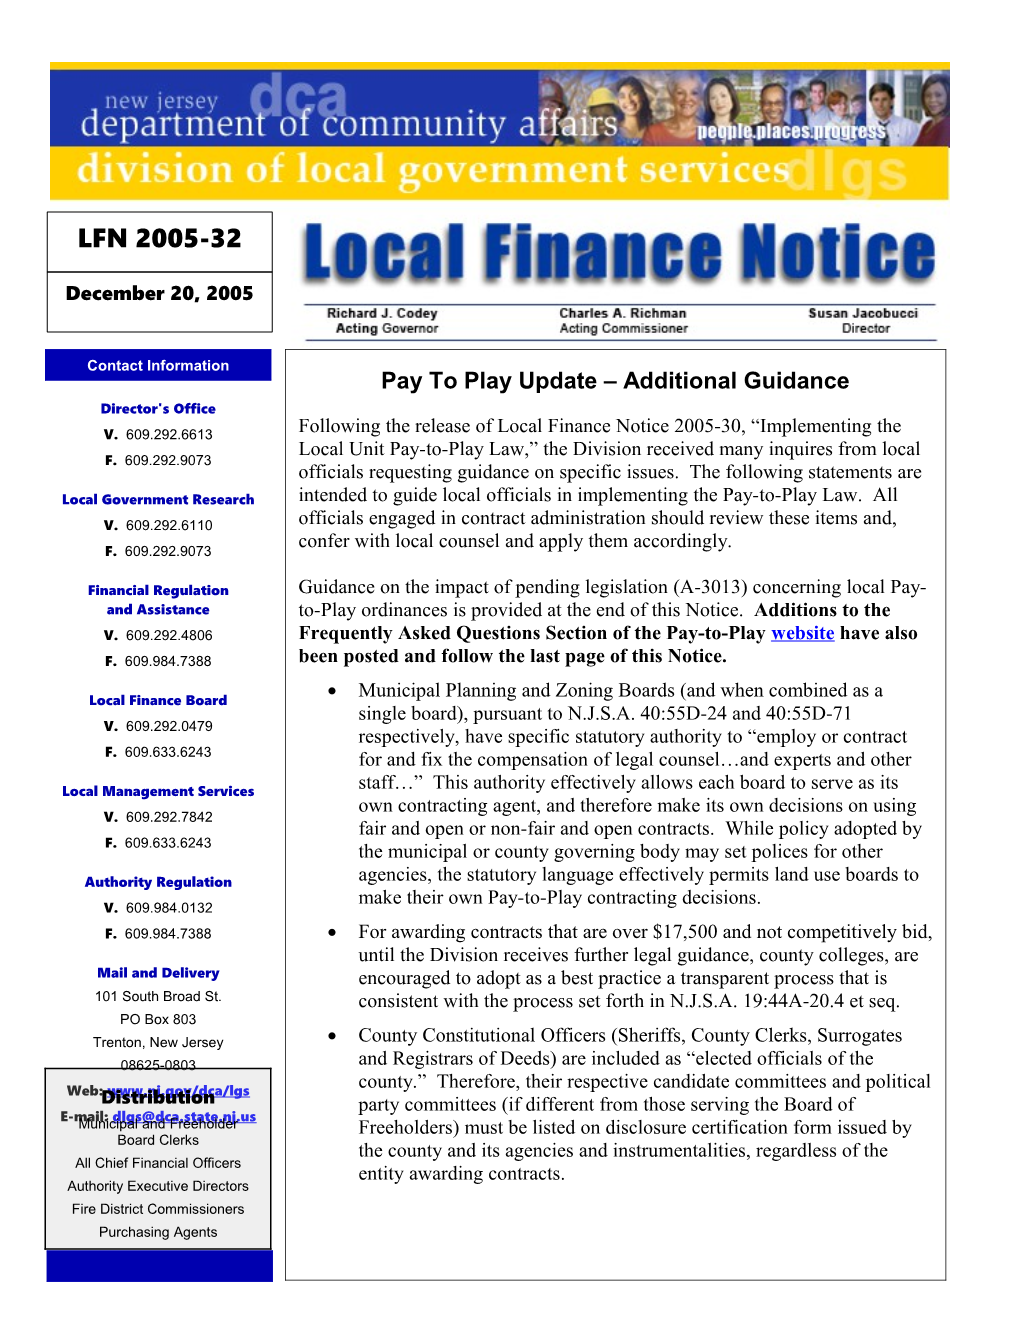 Local Finance Notice 2005-32December 20, 2005Page 1